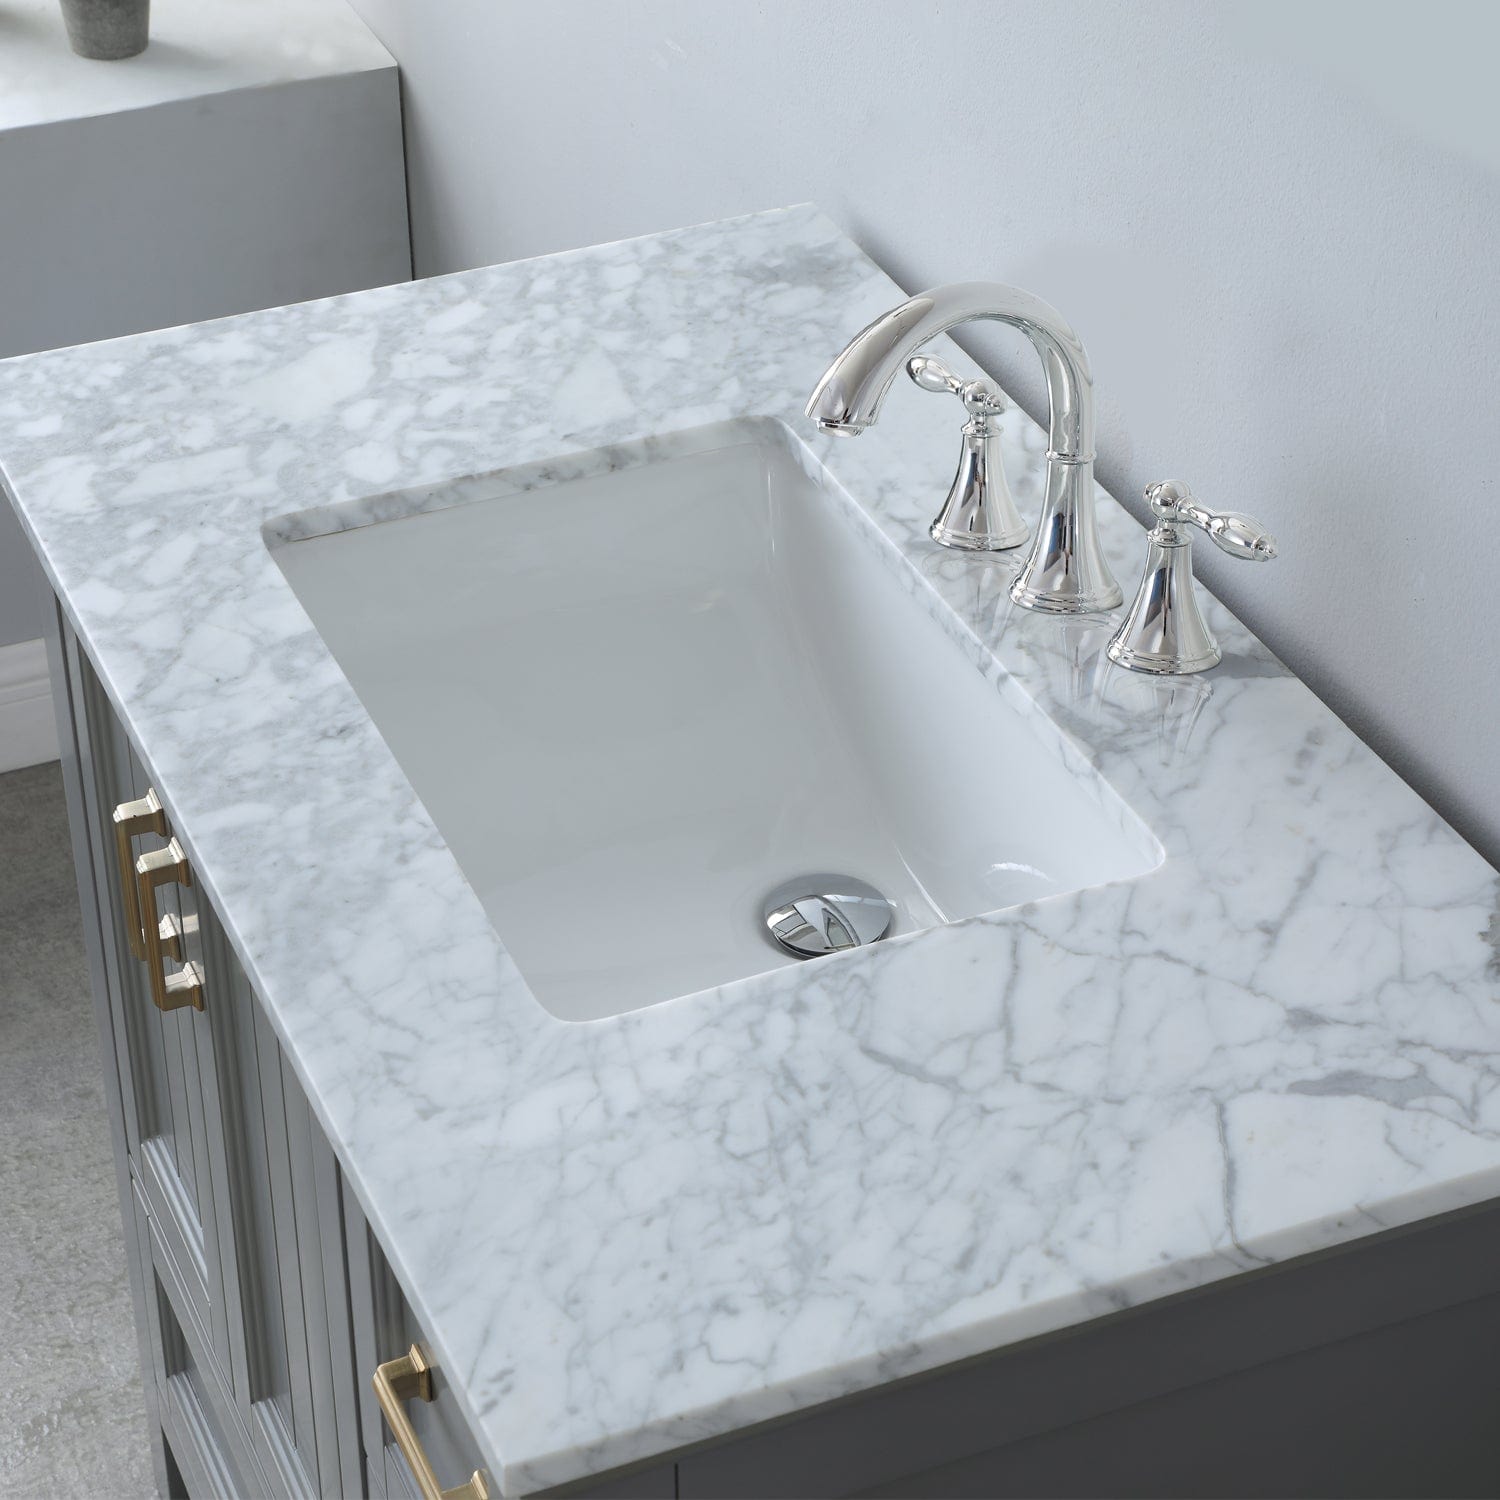 Altair Isla 36" Single Bathroom Vanity Set in Gray and Carrara White Marble Countertop without Mirror 538036-GR-CA-NM - Molaix631112970785Vanity538036-GR-CA-NM